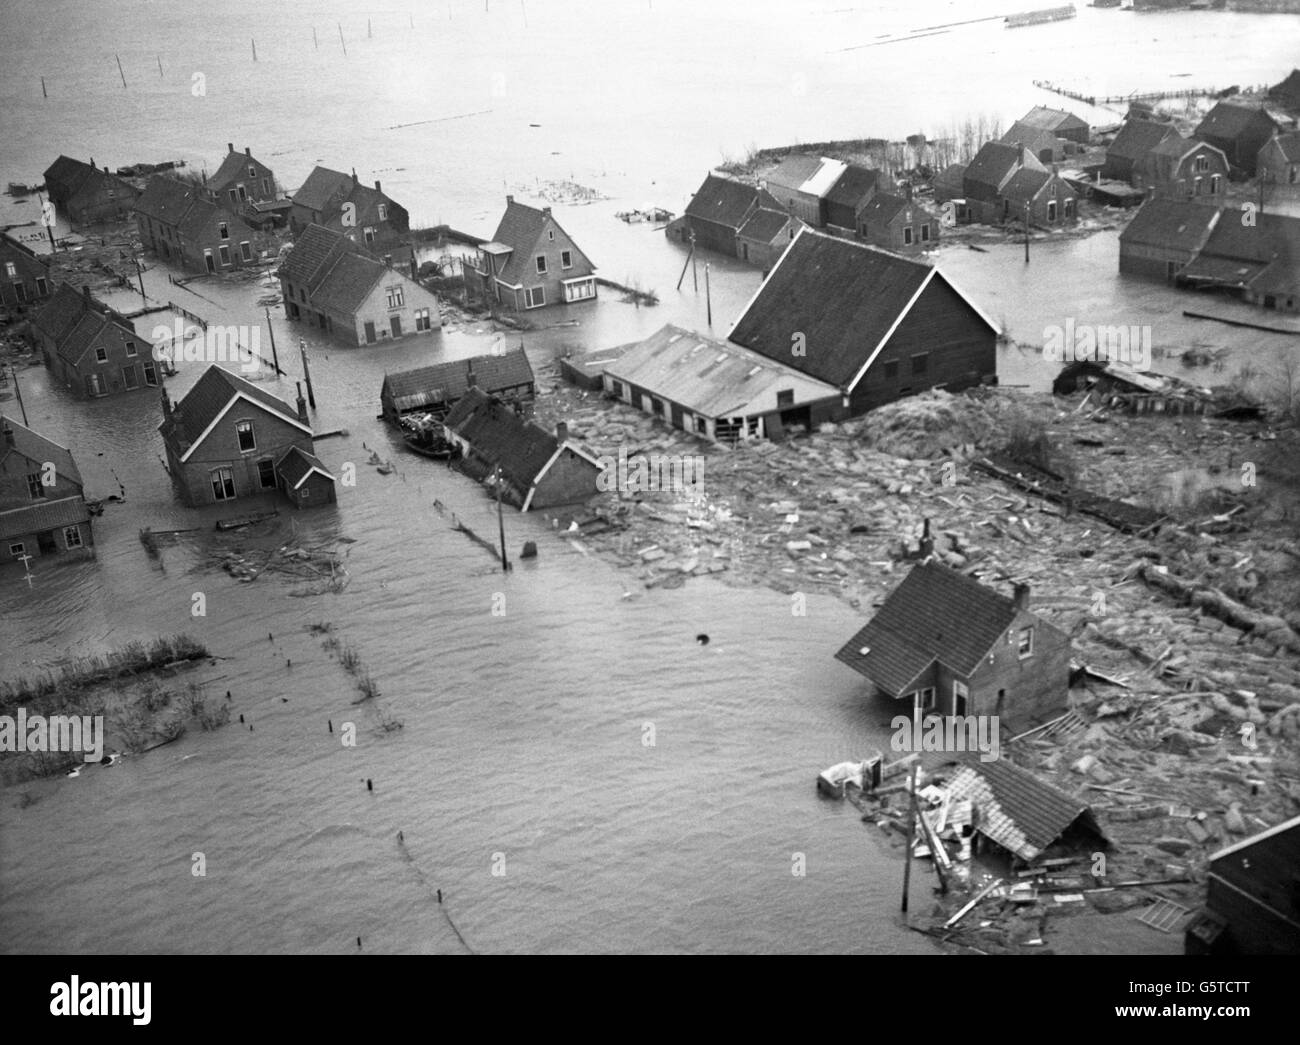 The unrelenting flood waters devastate the village of Zijpe on the Dutch island of Schouwen Duiveland. The battered buildings stand deserted amid the the flood water. Stock Photo